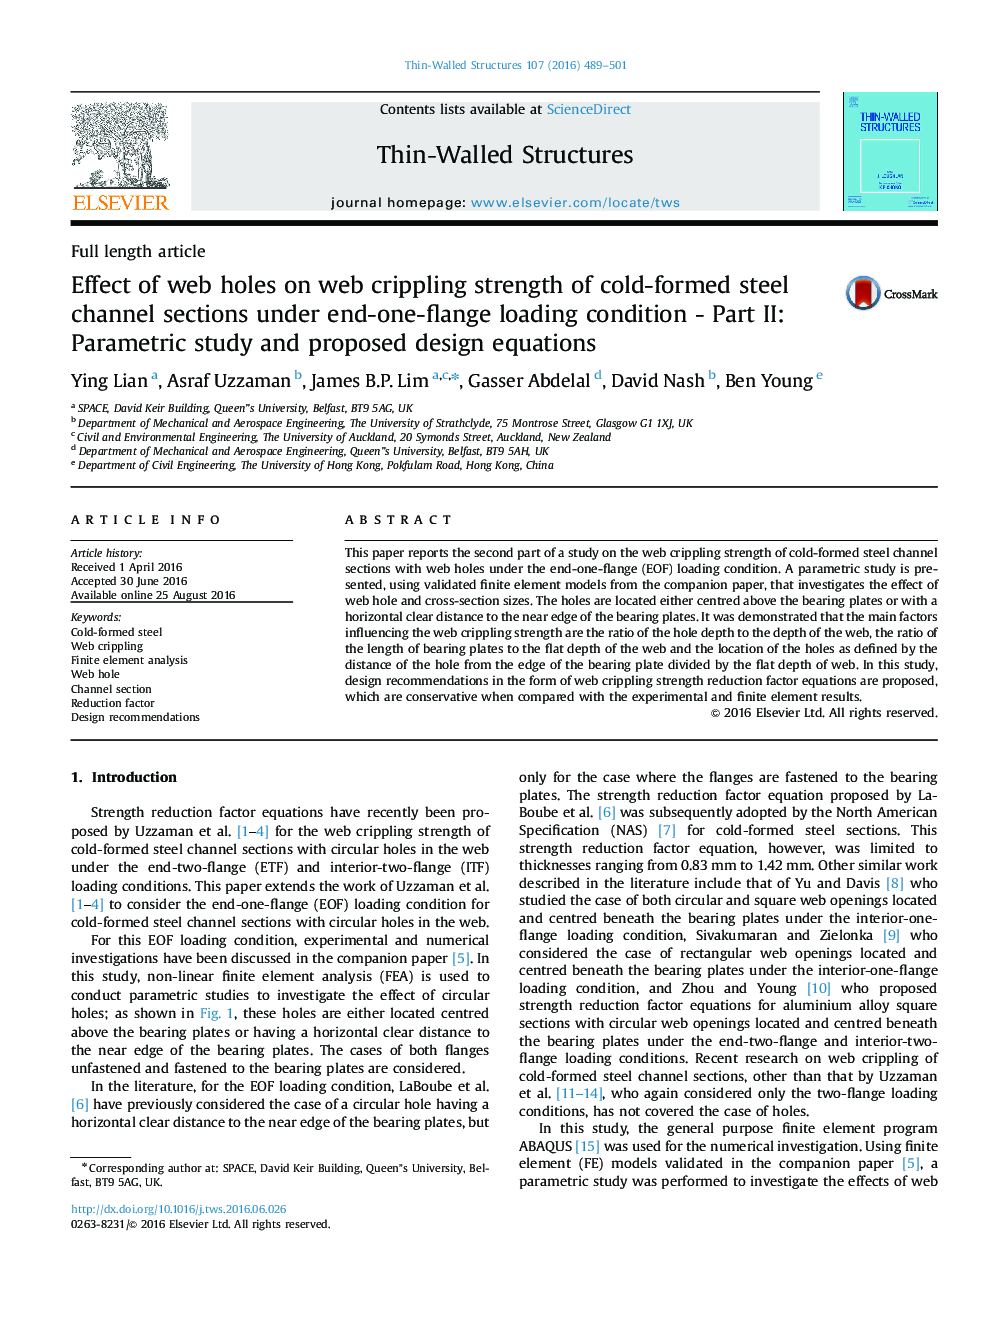 Effect of web holes on web crippling strength of cold-formed steel channel sections under end-one-flange loading condition - Part II: Parametric study and proposed design equations